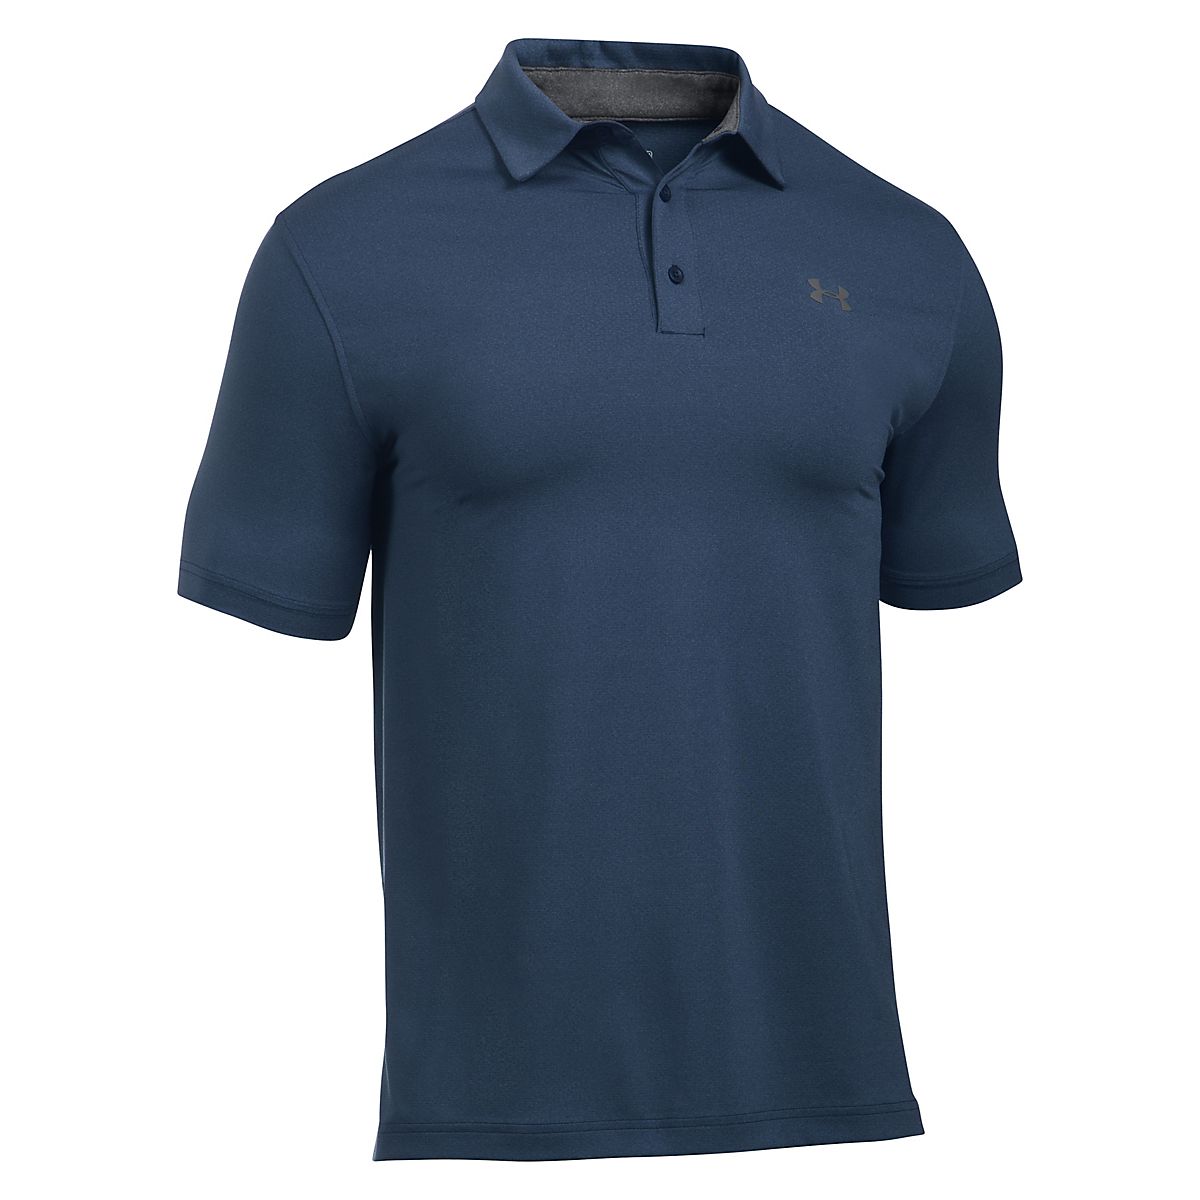 Under Armour Men's Playoff Vented Polo Shirt | Academy